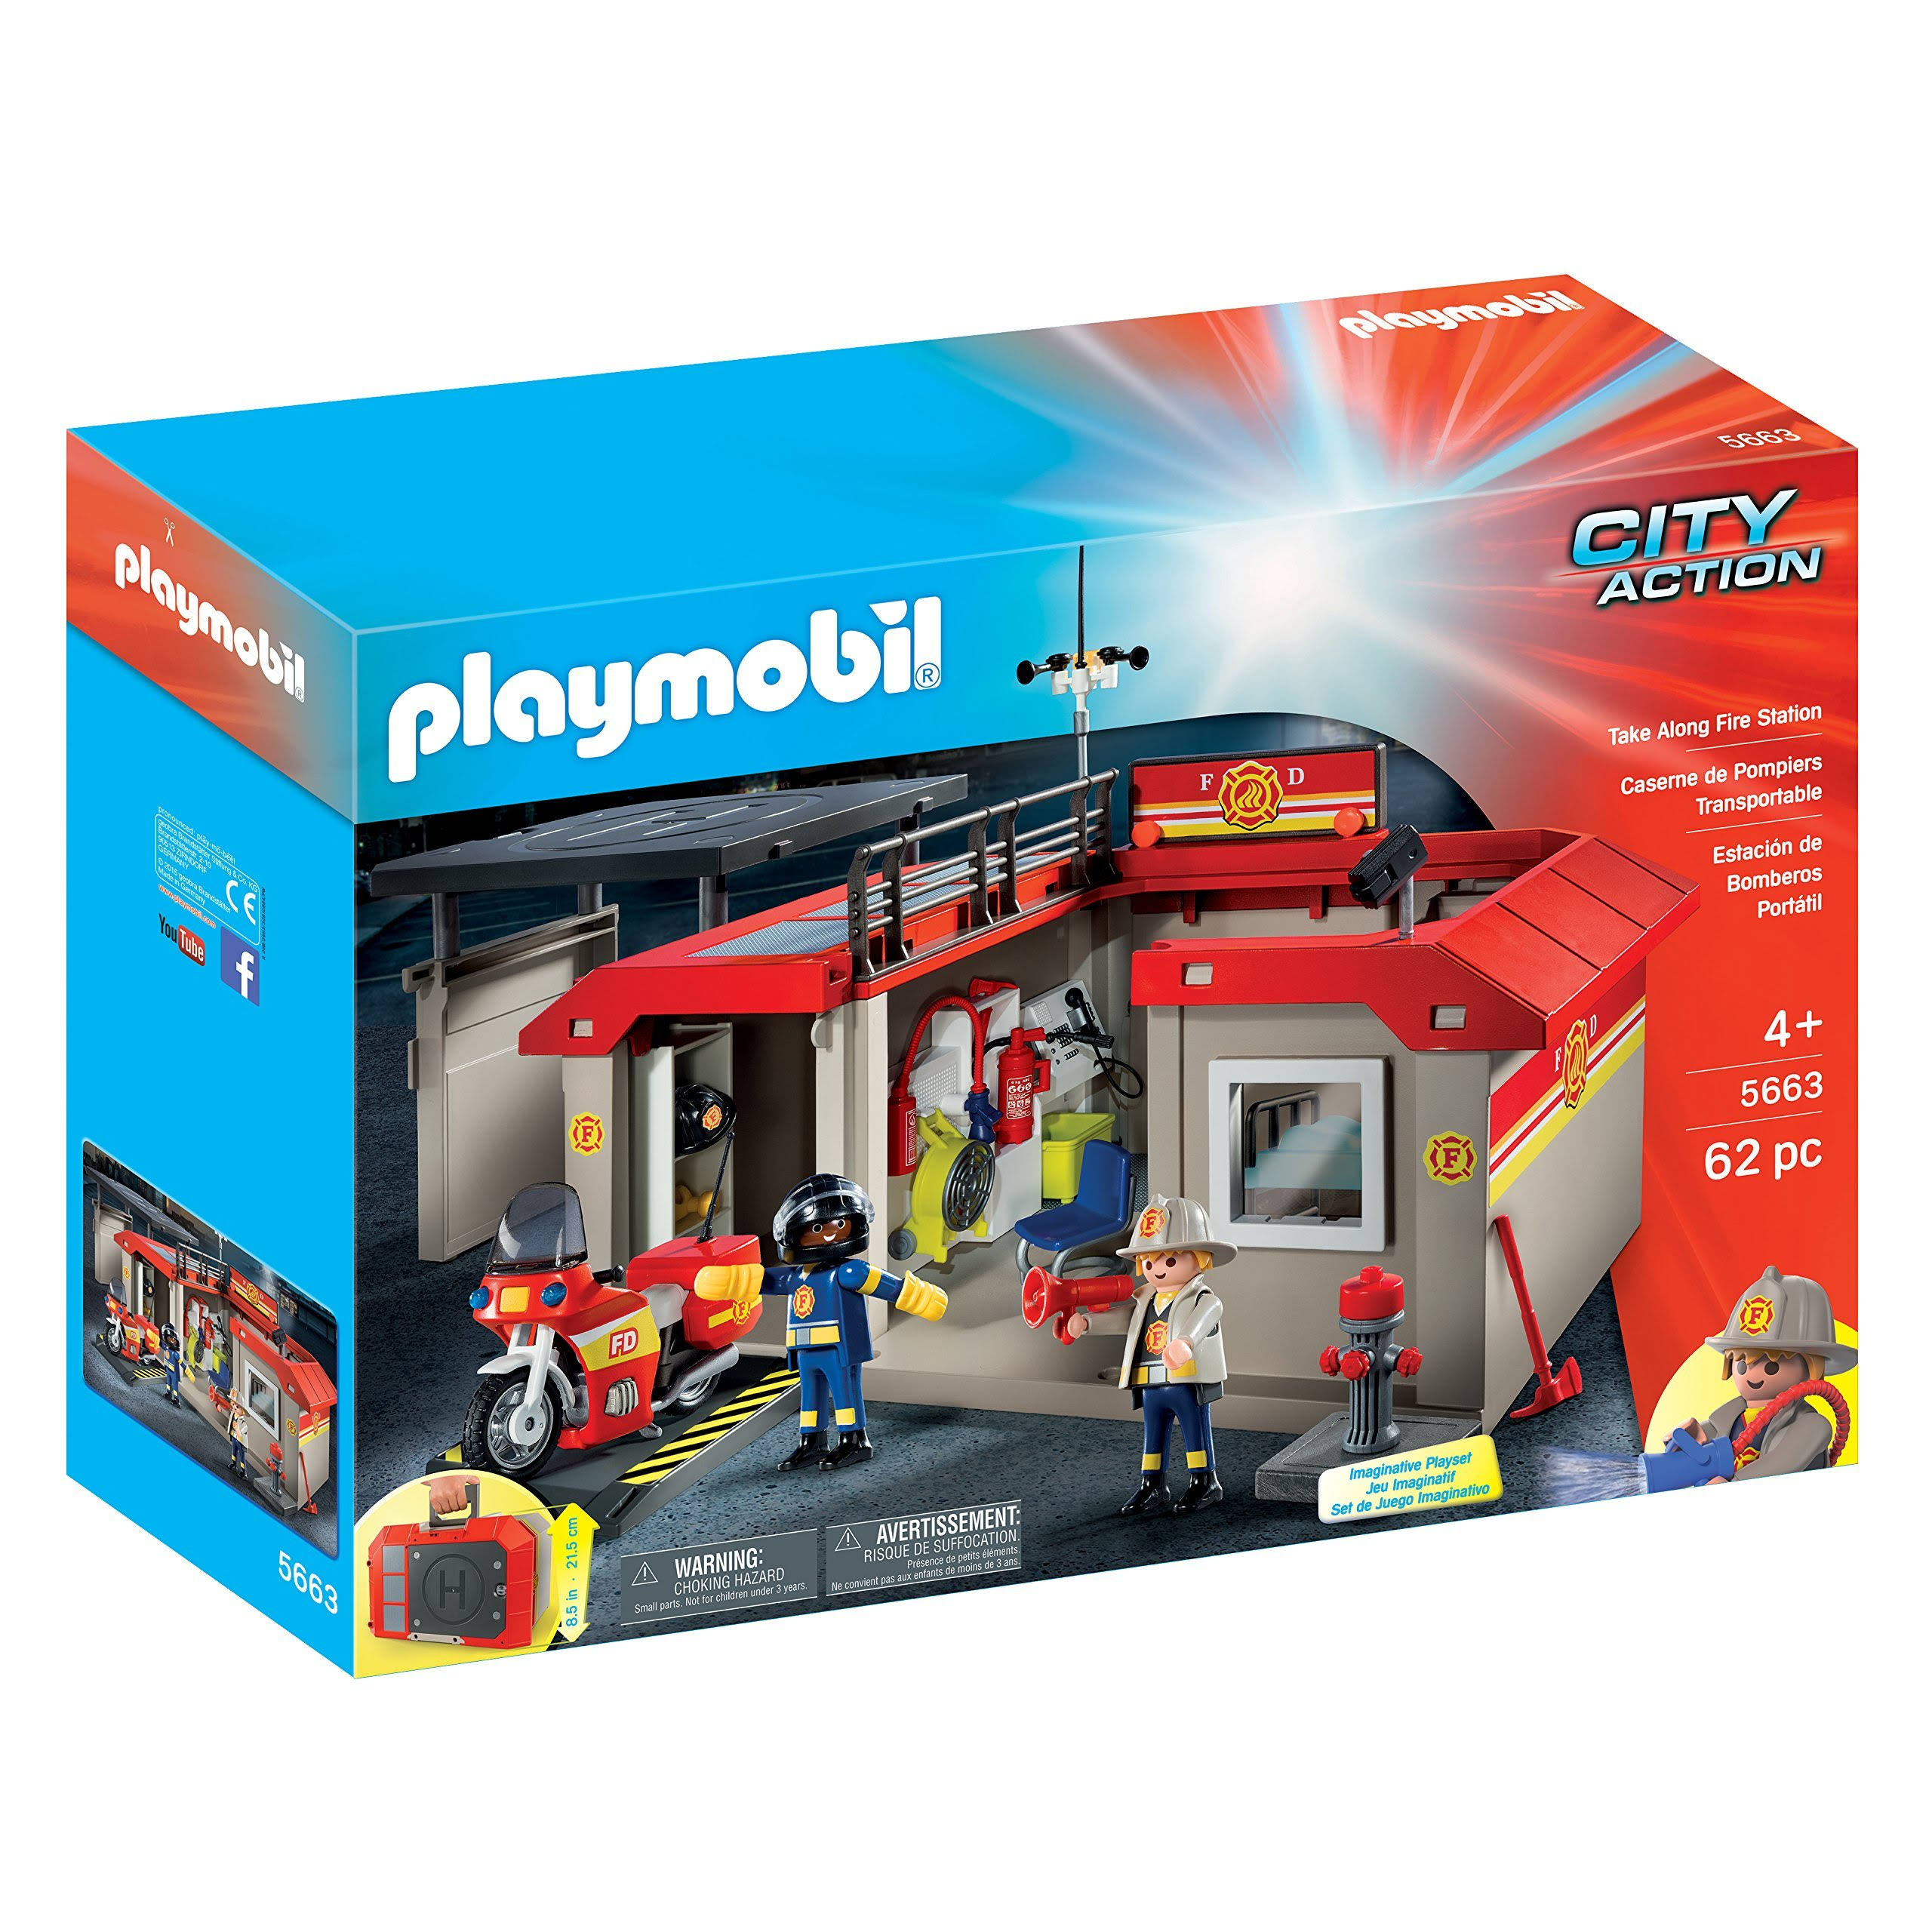 Playmobil City Action Playset - Take Along Fire Station